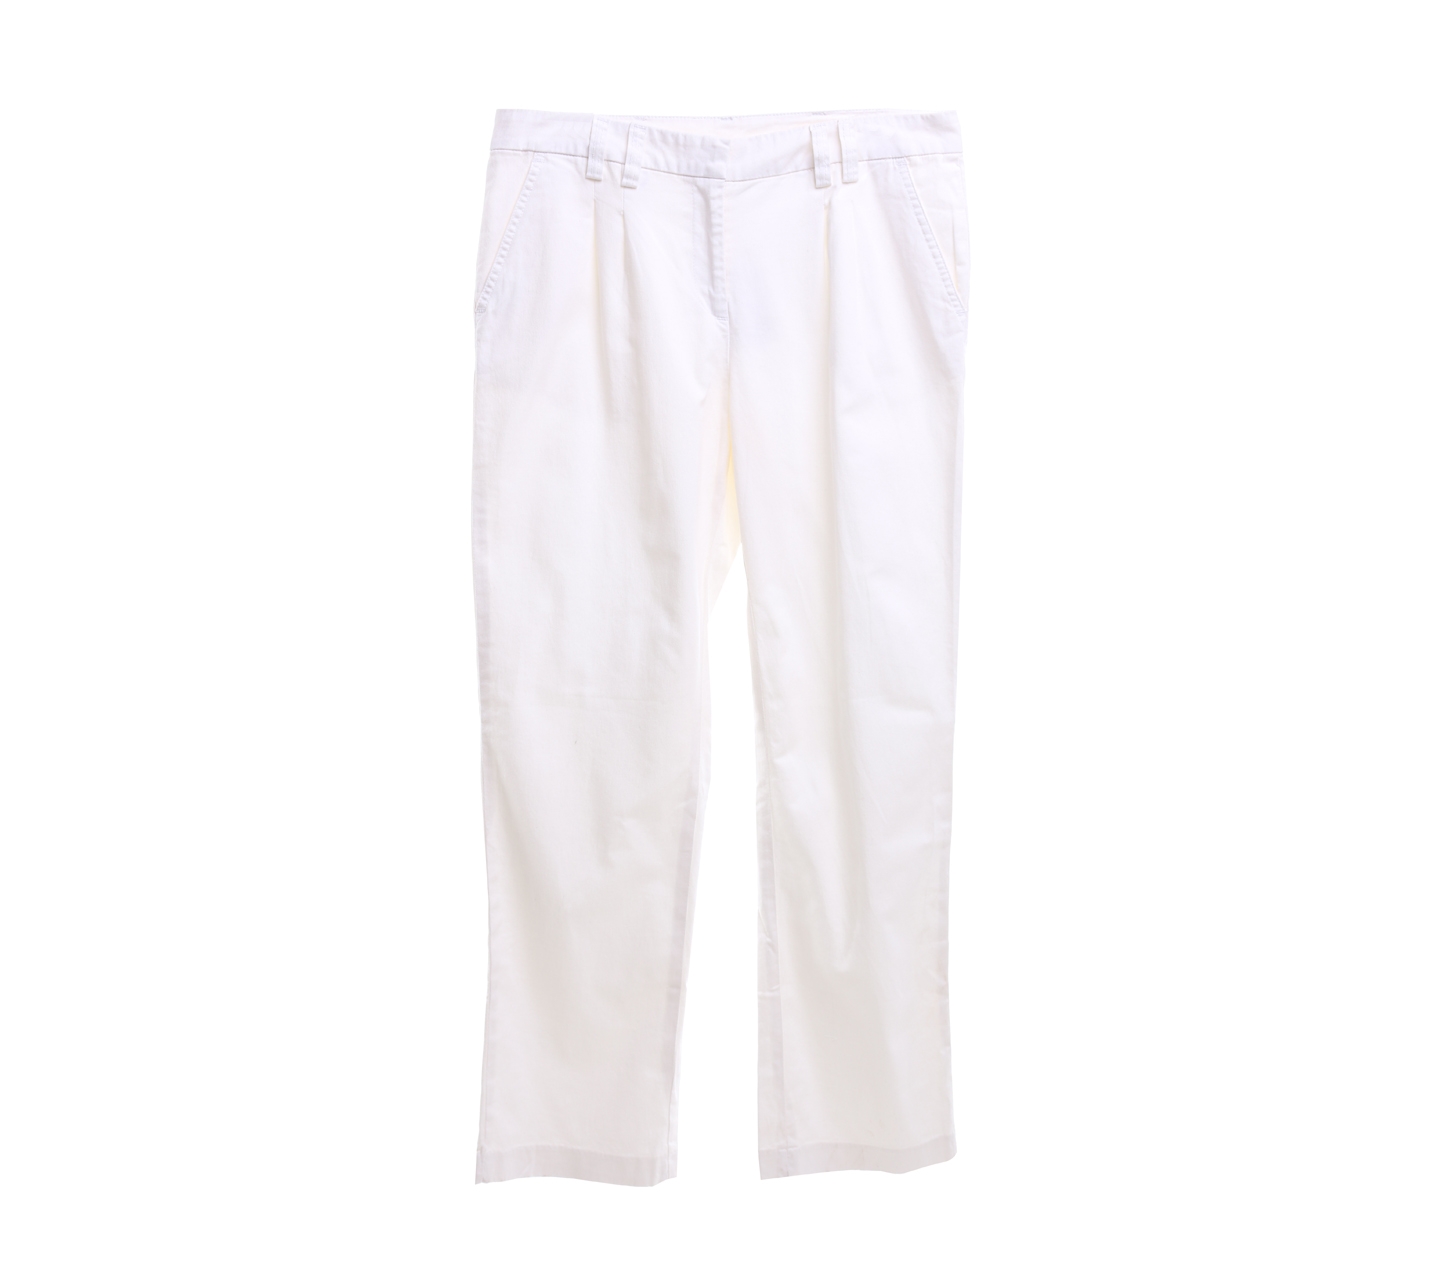 P.S. The Spirit Of Personal Style Off White Long Pants